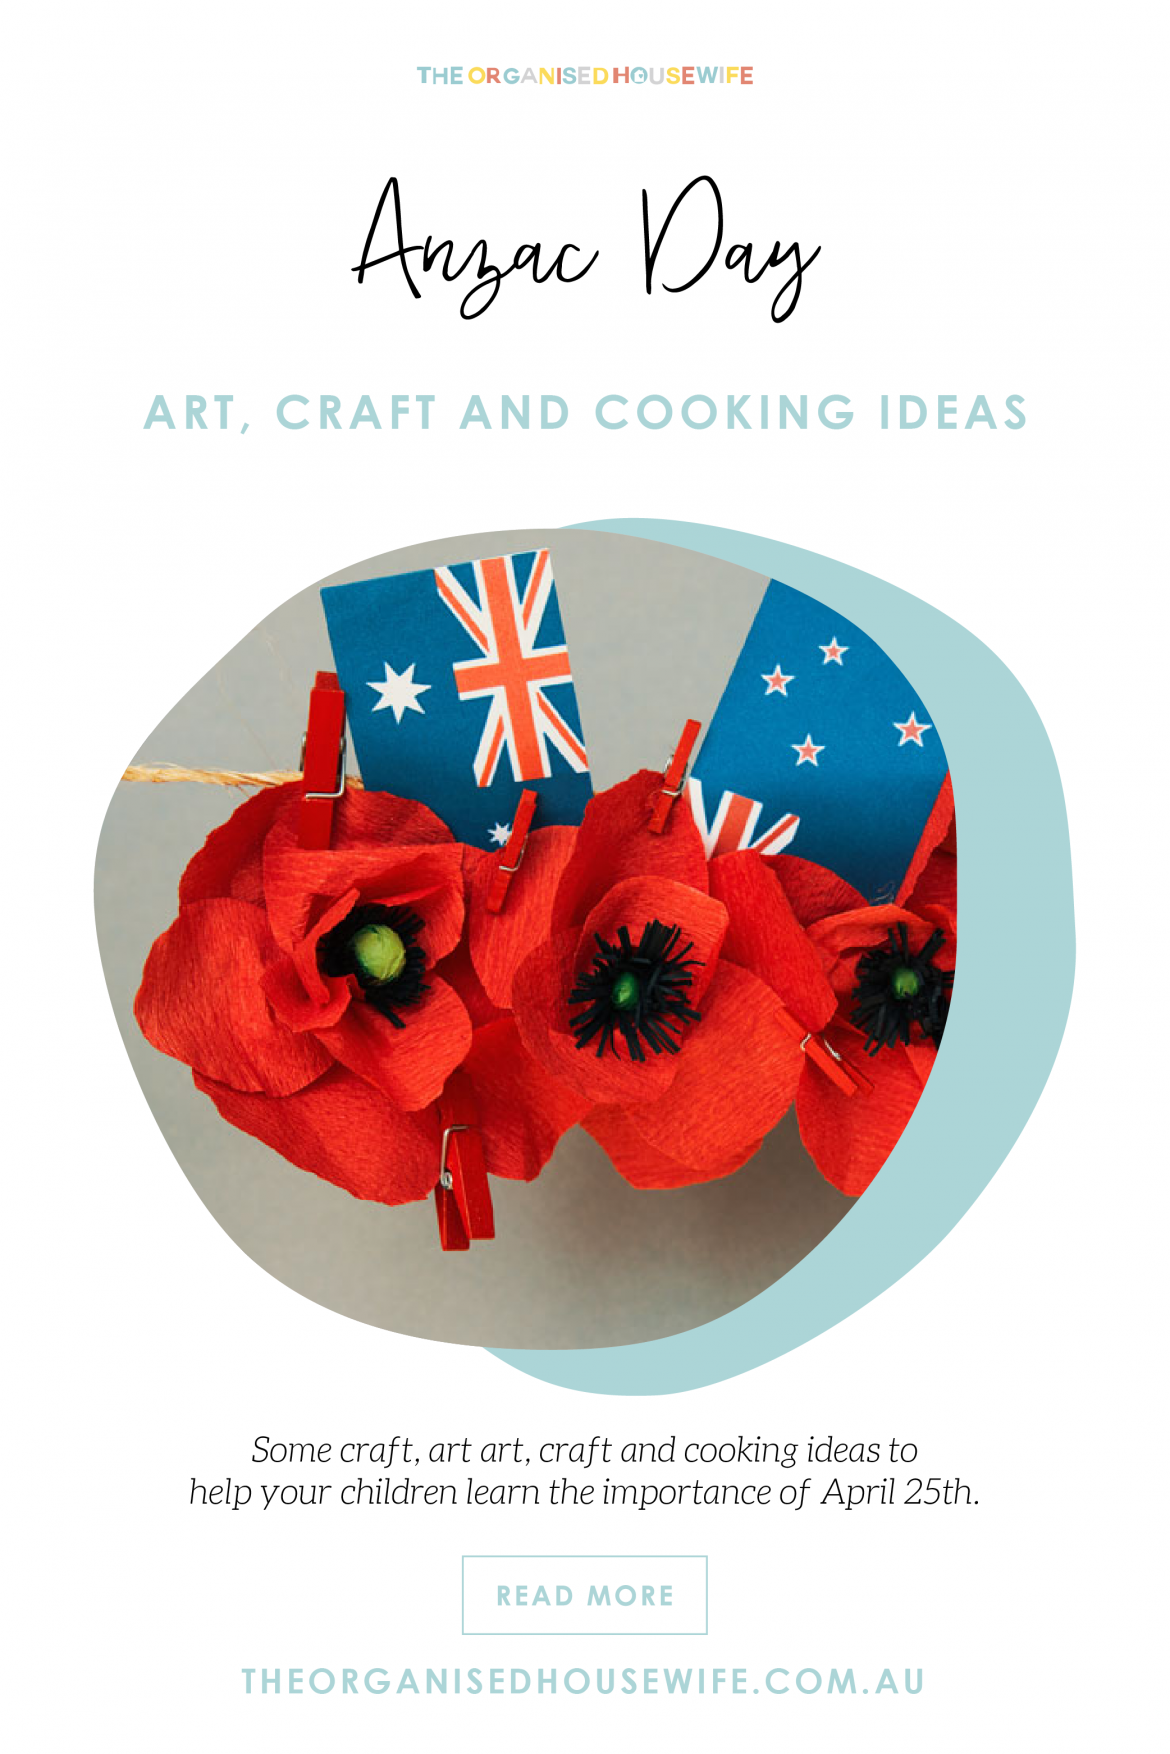 anzac-day-craft-ideas-to-help-children-learn-the-organised-housewife